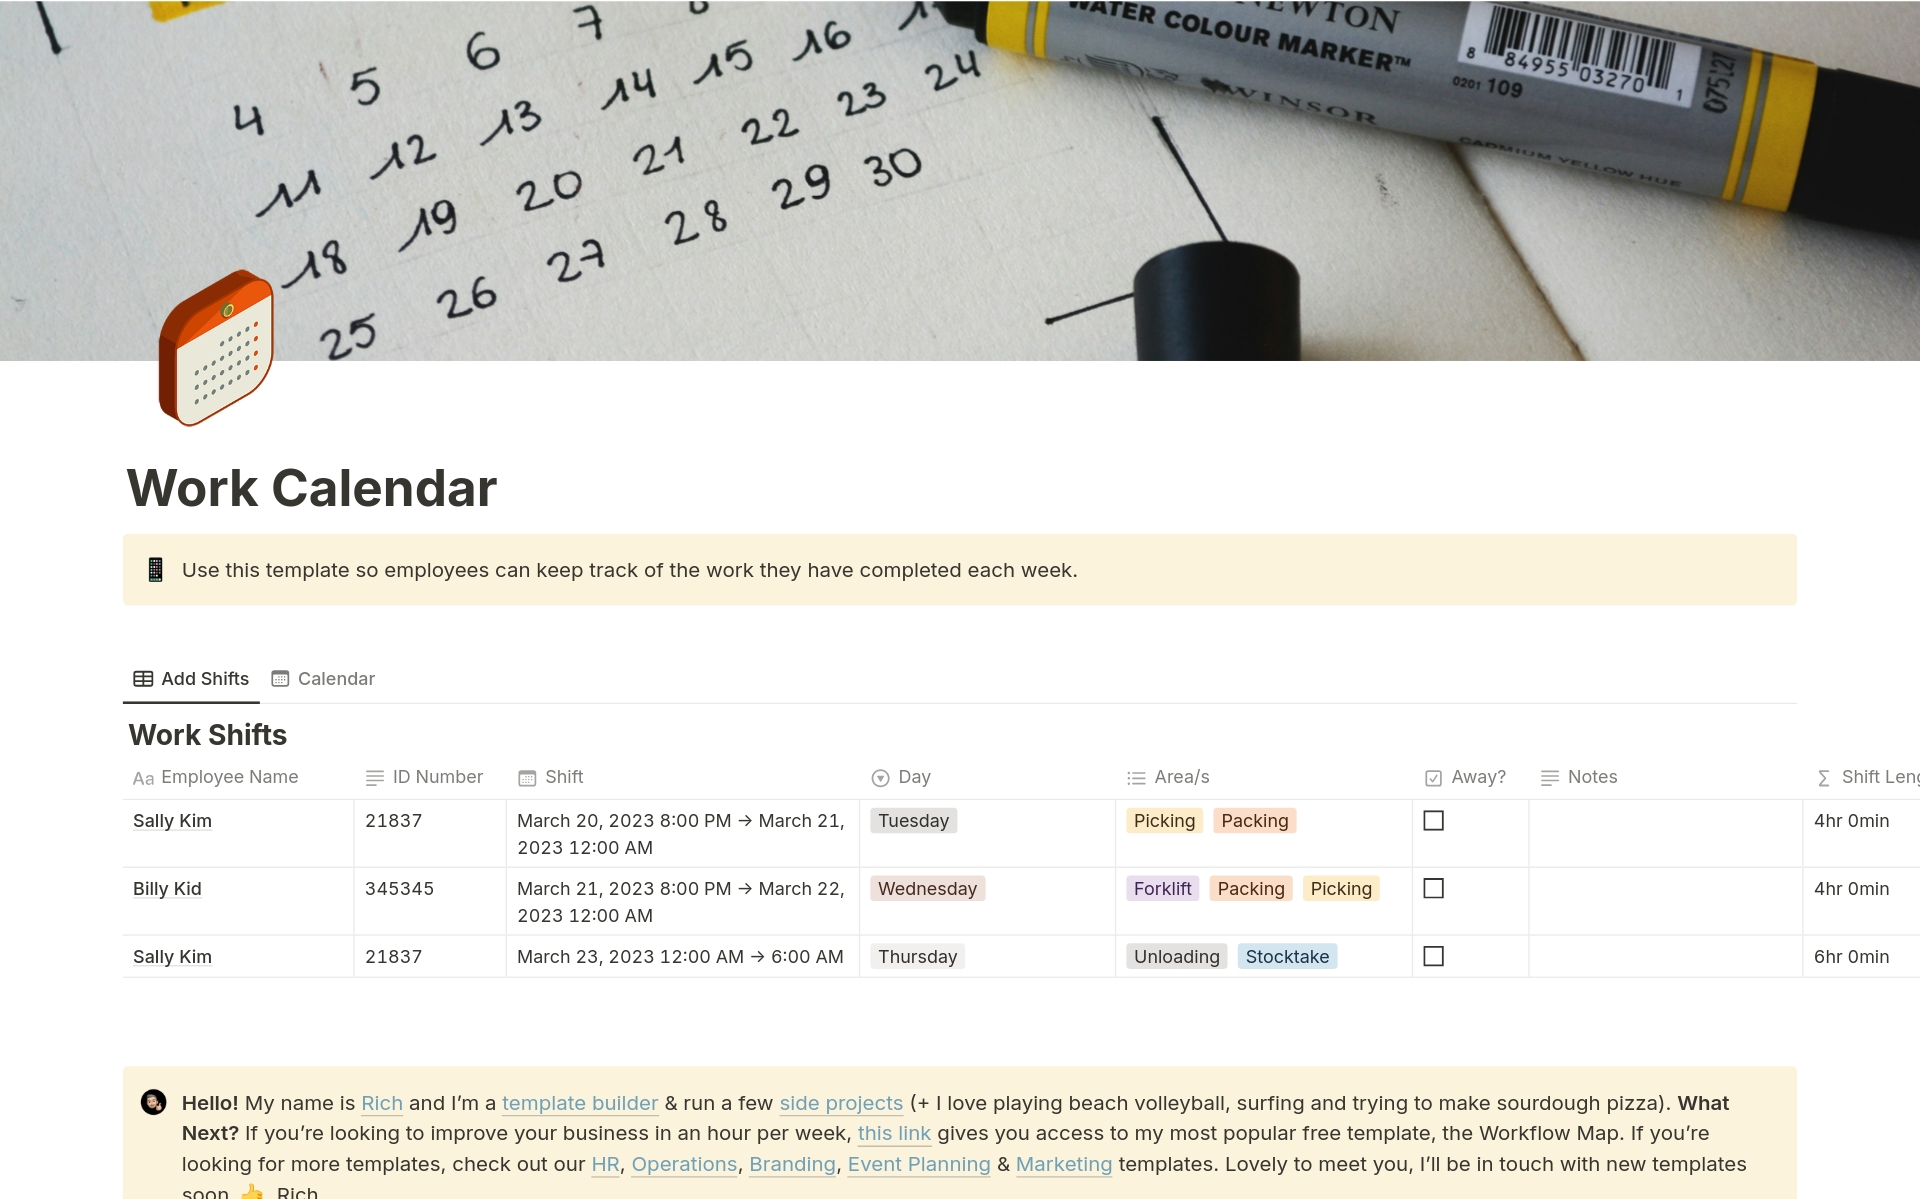 Have your most productive week yet with this work calendar template for teams.